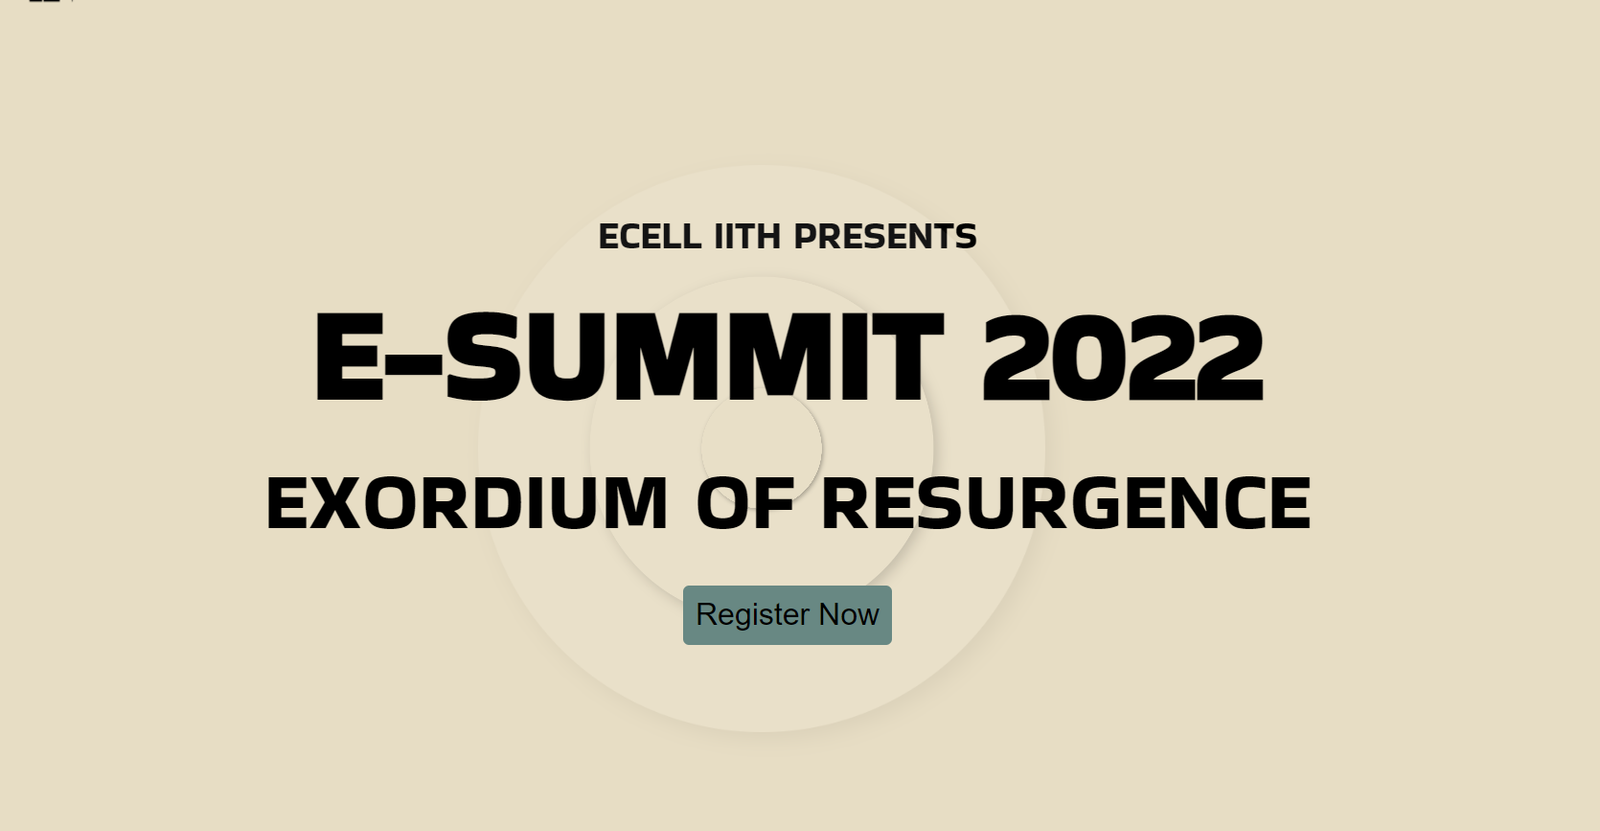 ECELL IITH PRESENTS E-SUMMIT 2022